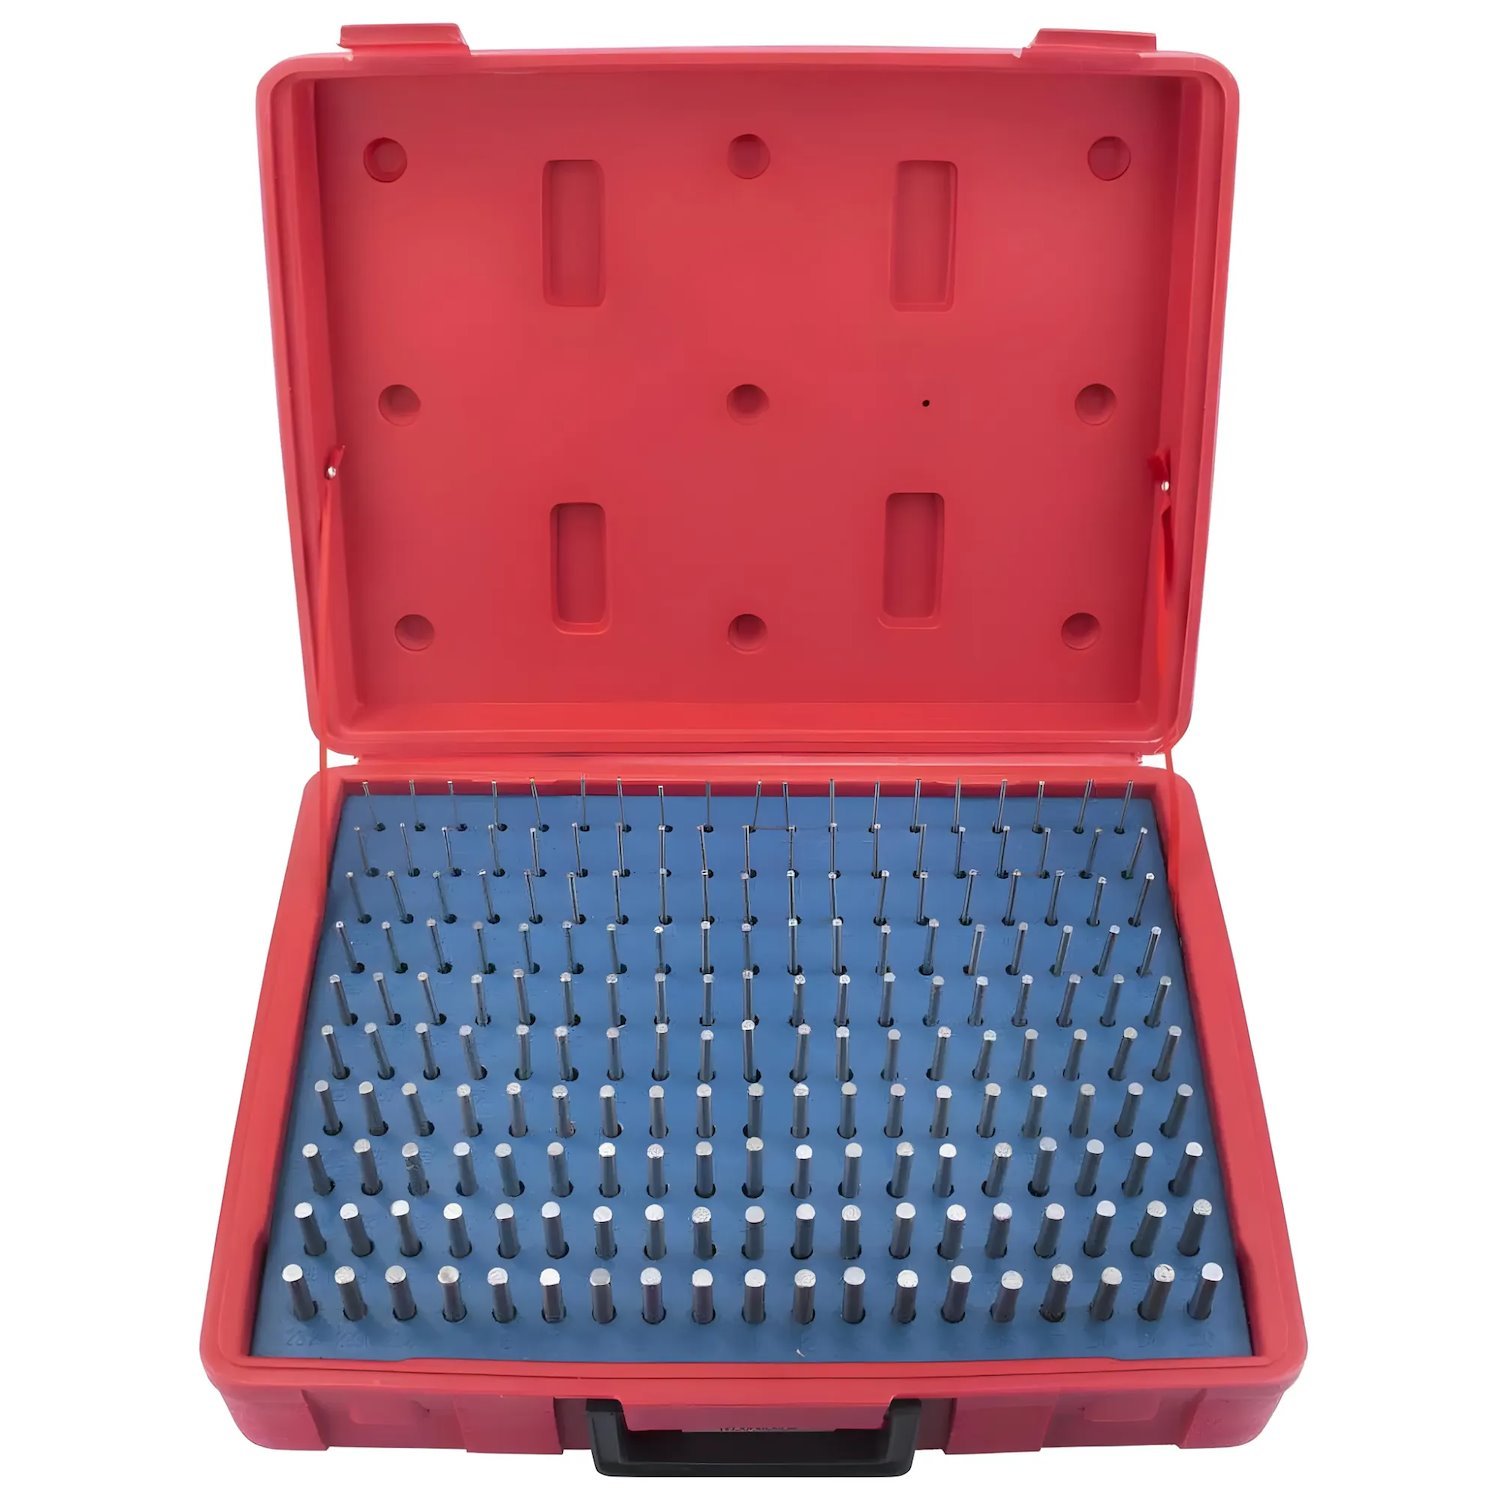 00-56013 Pin Gage Set, Size: .011-.060 in., Set qty: 50, Length: 2 in., Accuracy: +.0000-.0002 in.